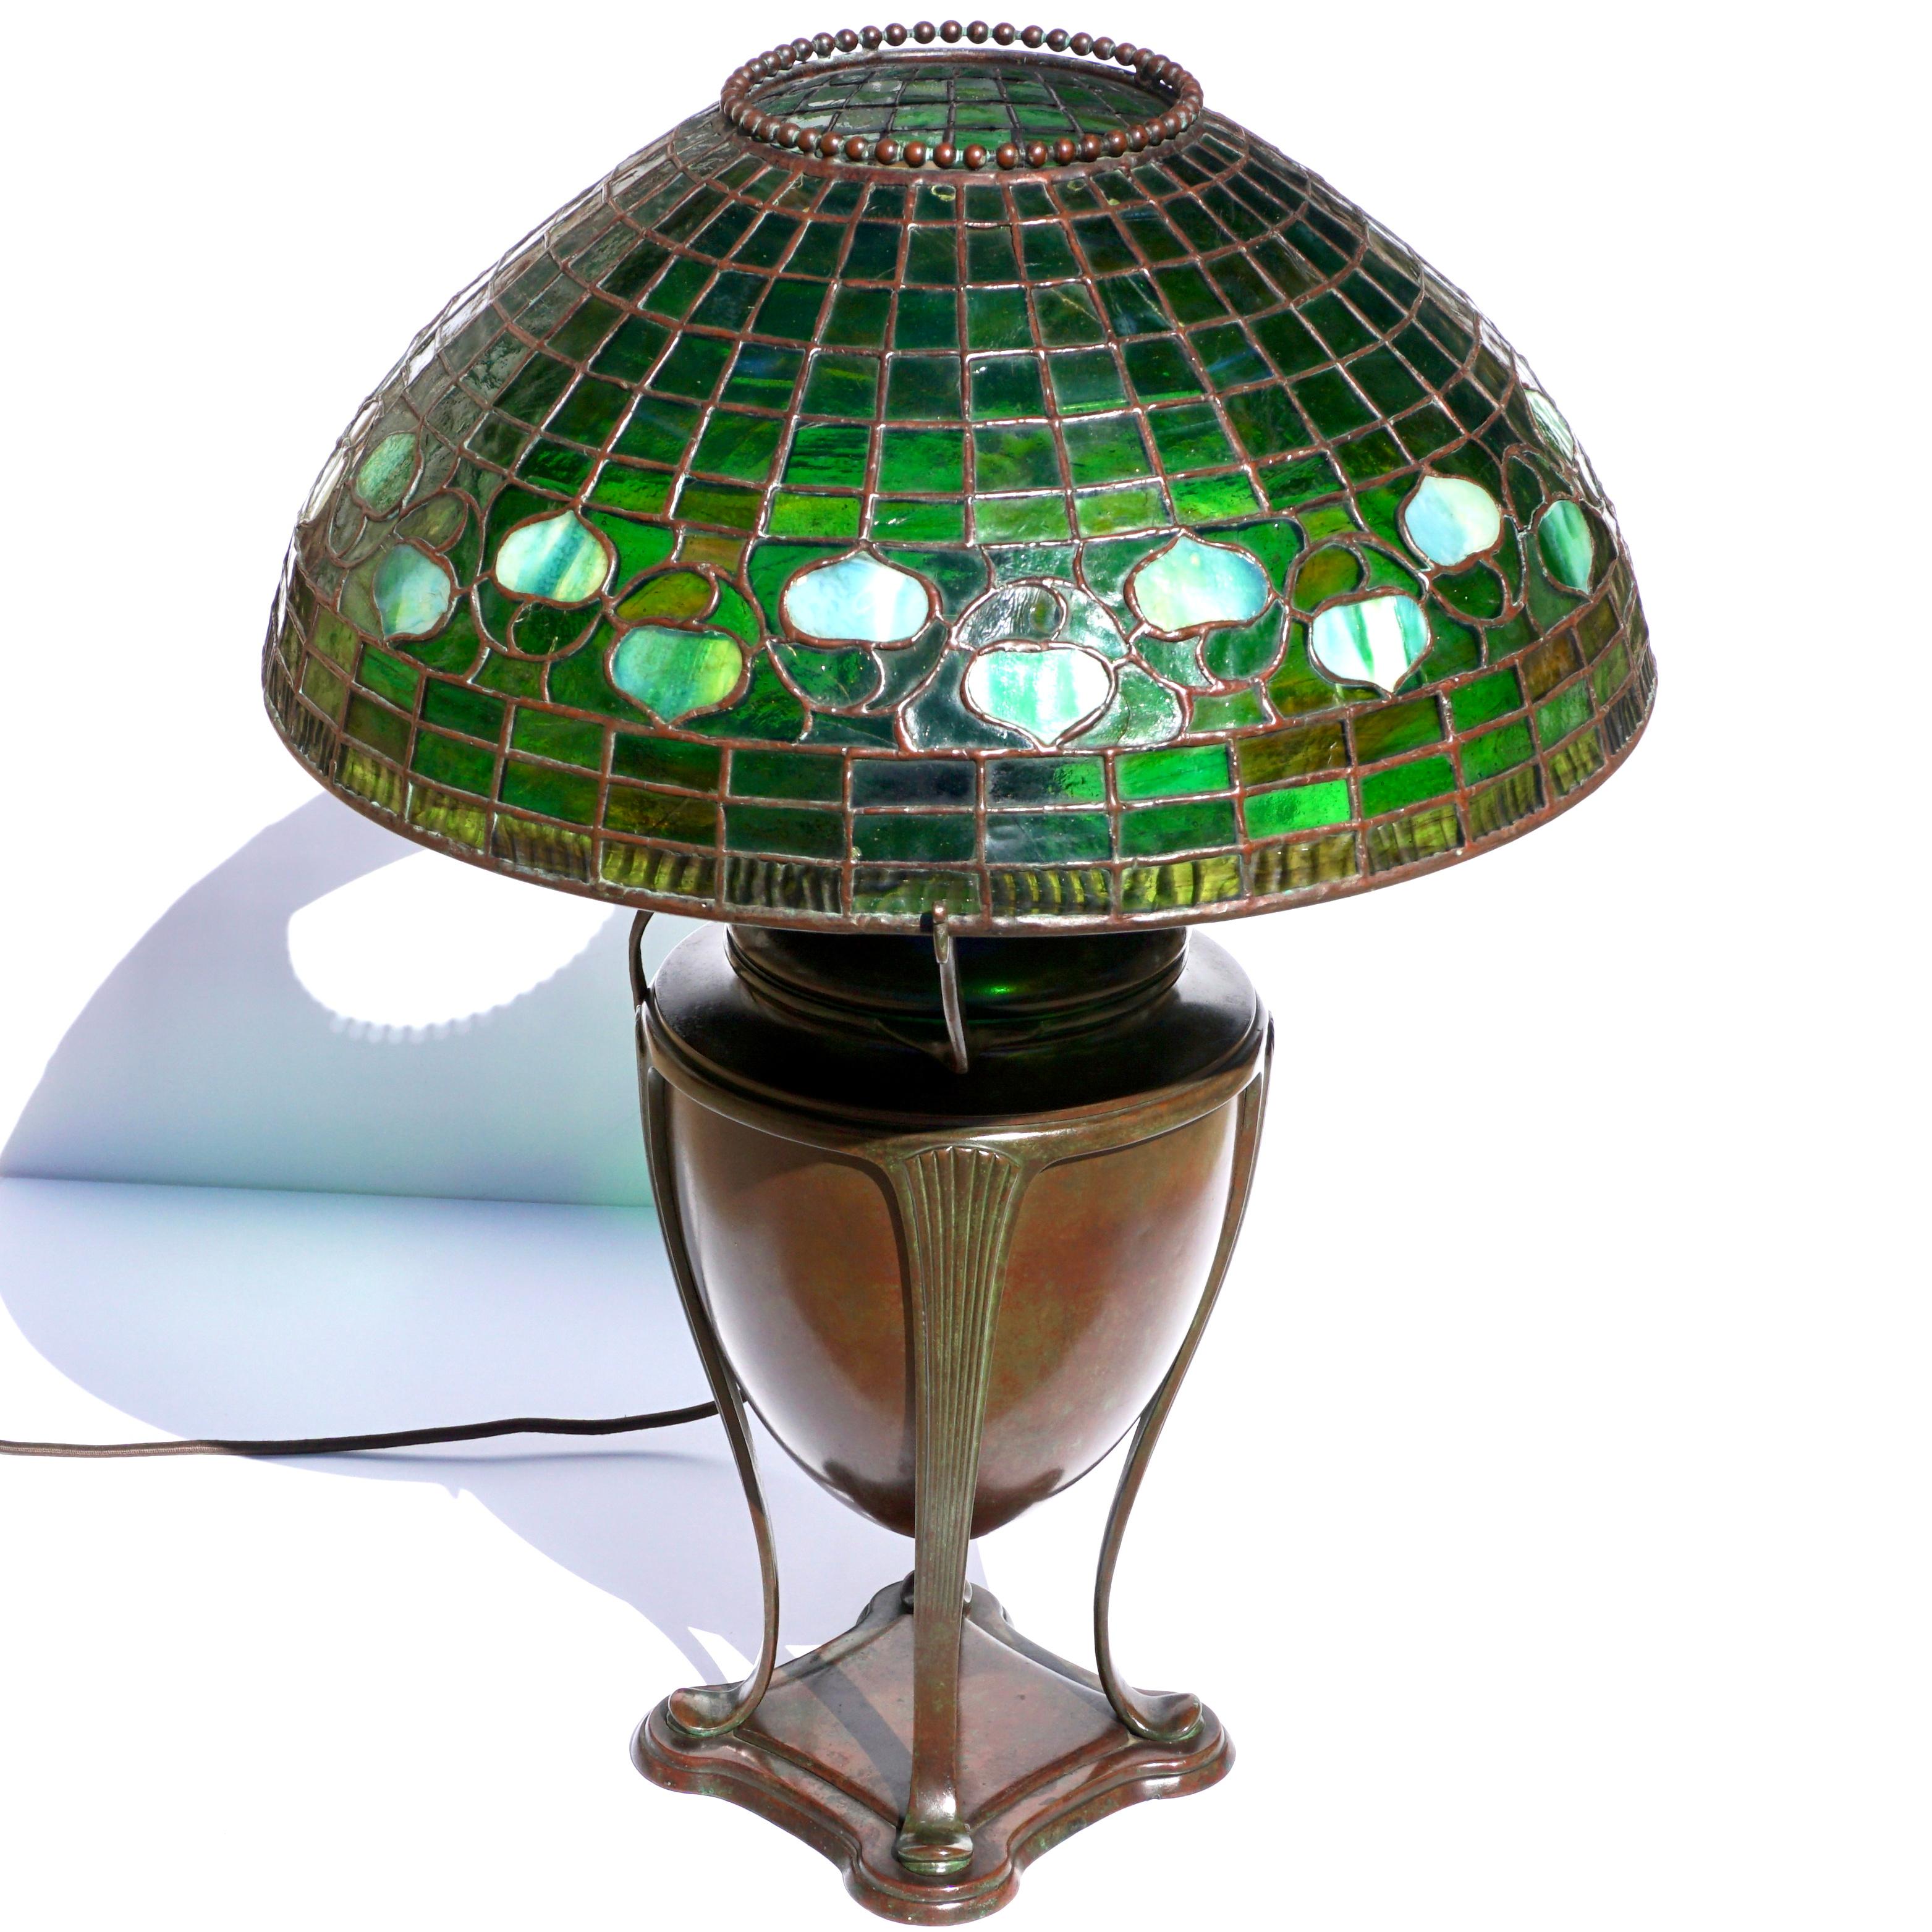 A Tiffany Studios Acorn leaded Glass And Bronze Table Lamp. Circa 1895. 

This lamp is an early example. Circa the 1890s; Tiffany was developing what would become the common table lamp. With the onset of electricity and the demise of oil lamps came